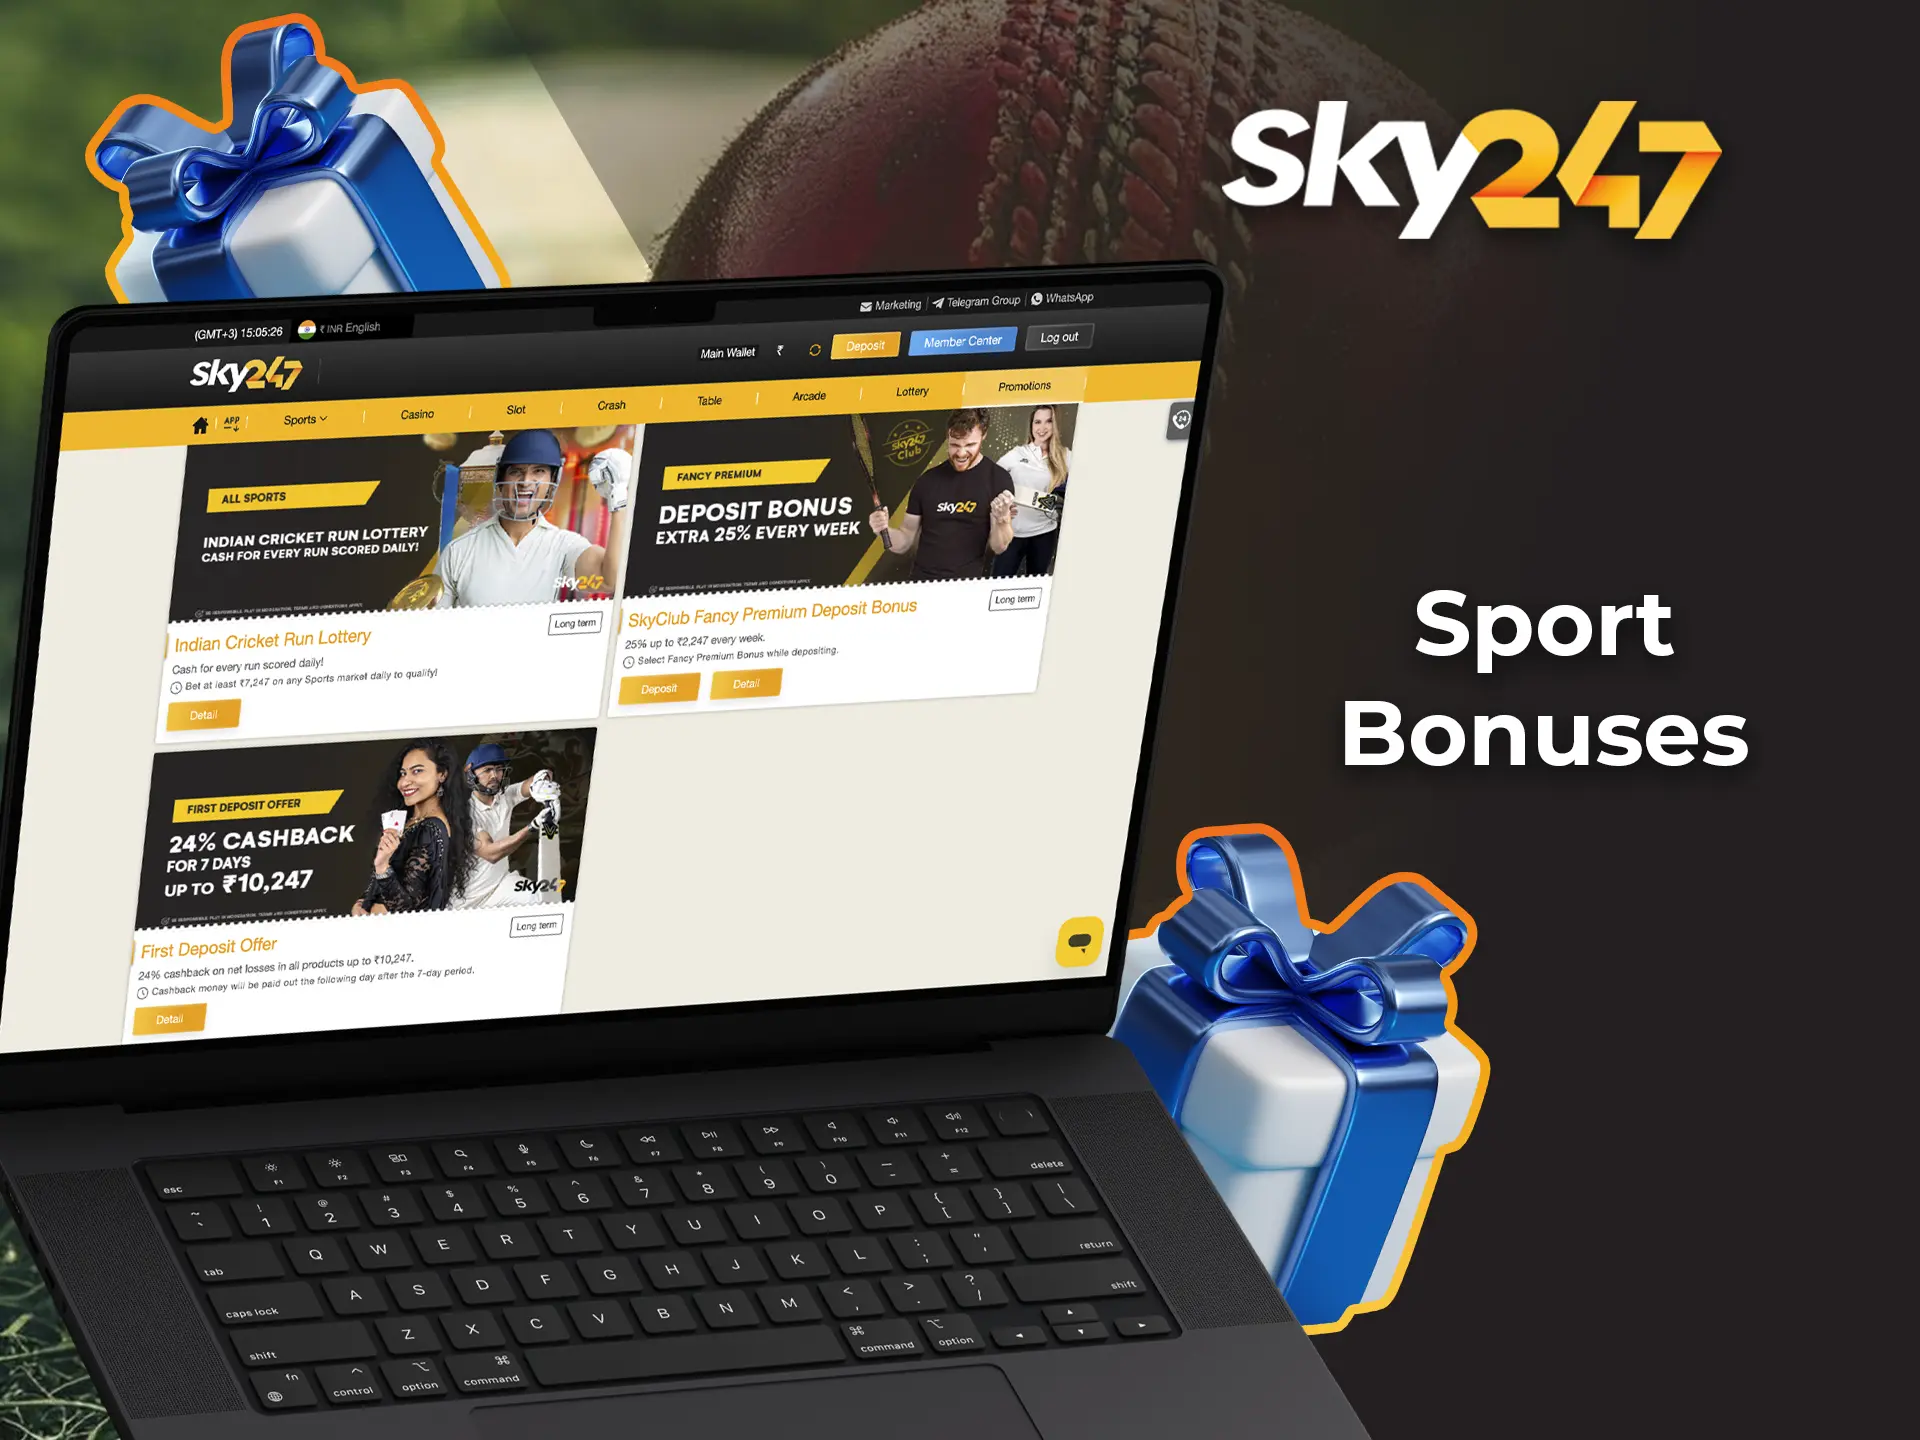 Sky247 Casino has a great gift for all fans of sports and the popular cricket.